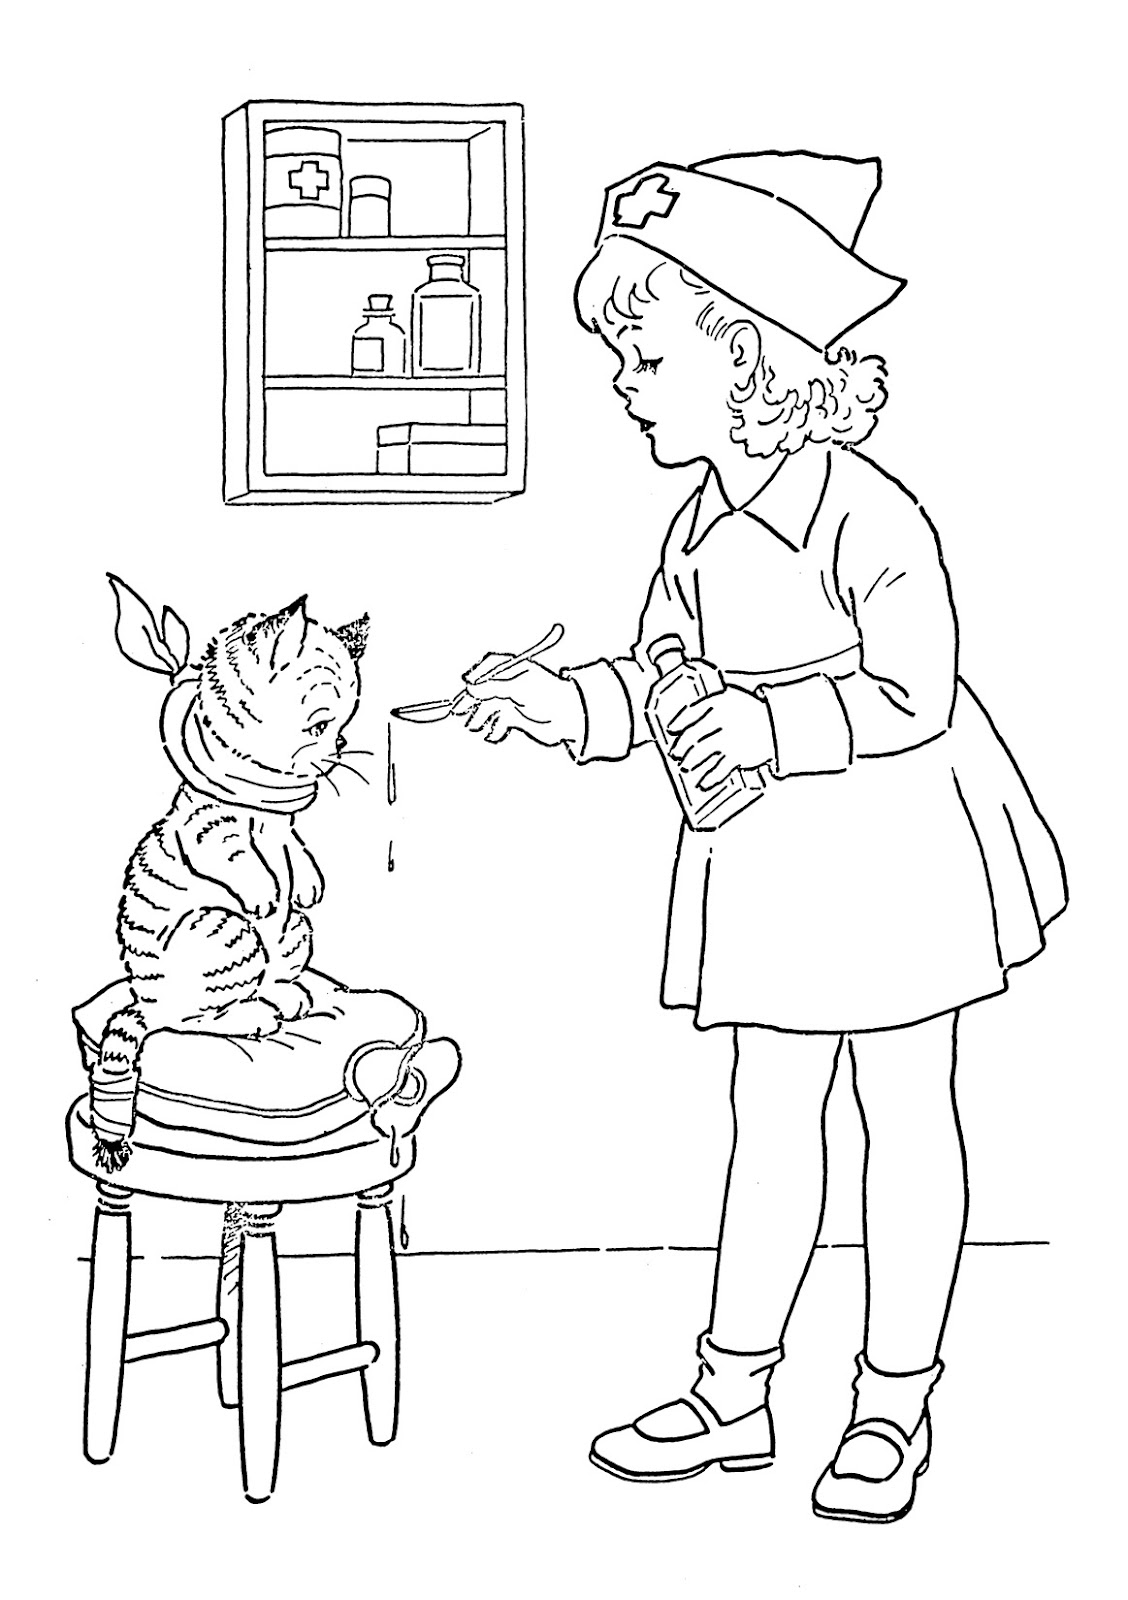 nurse-coloring-pages-best-coloring-pages-for-kids